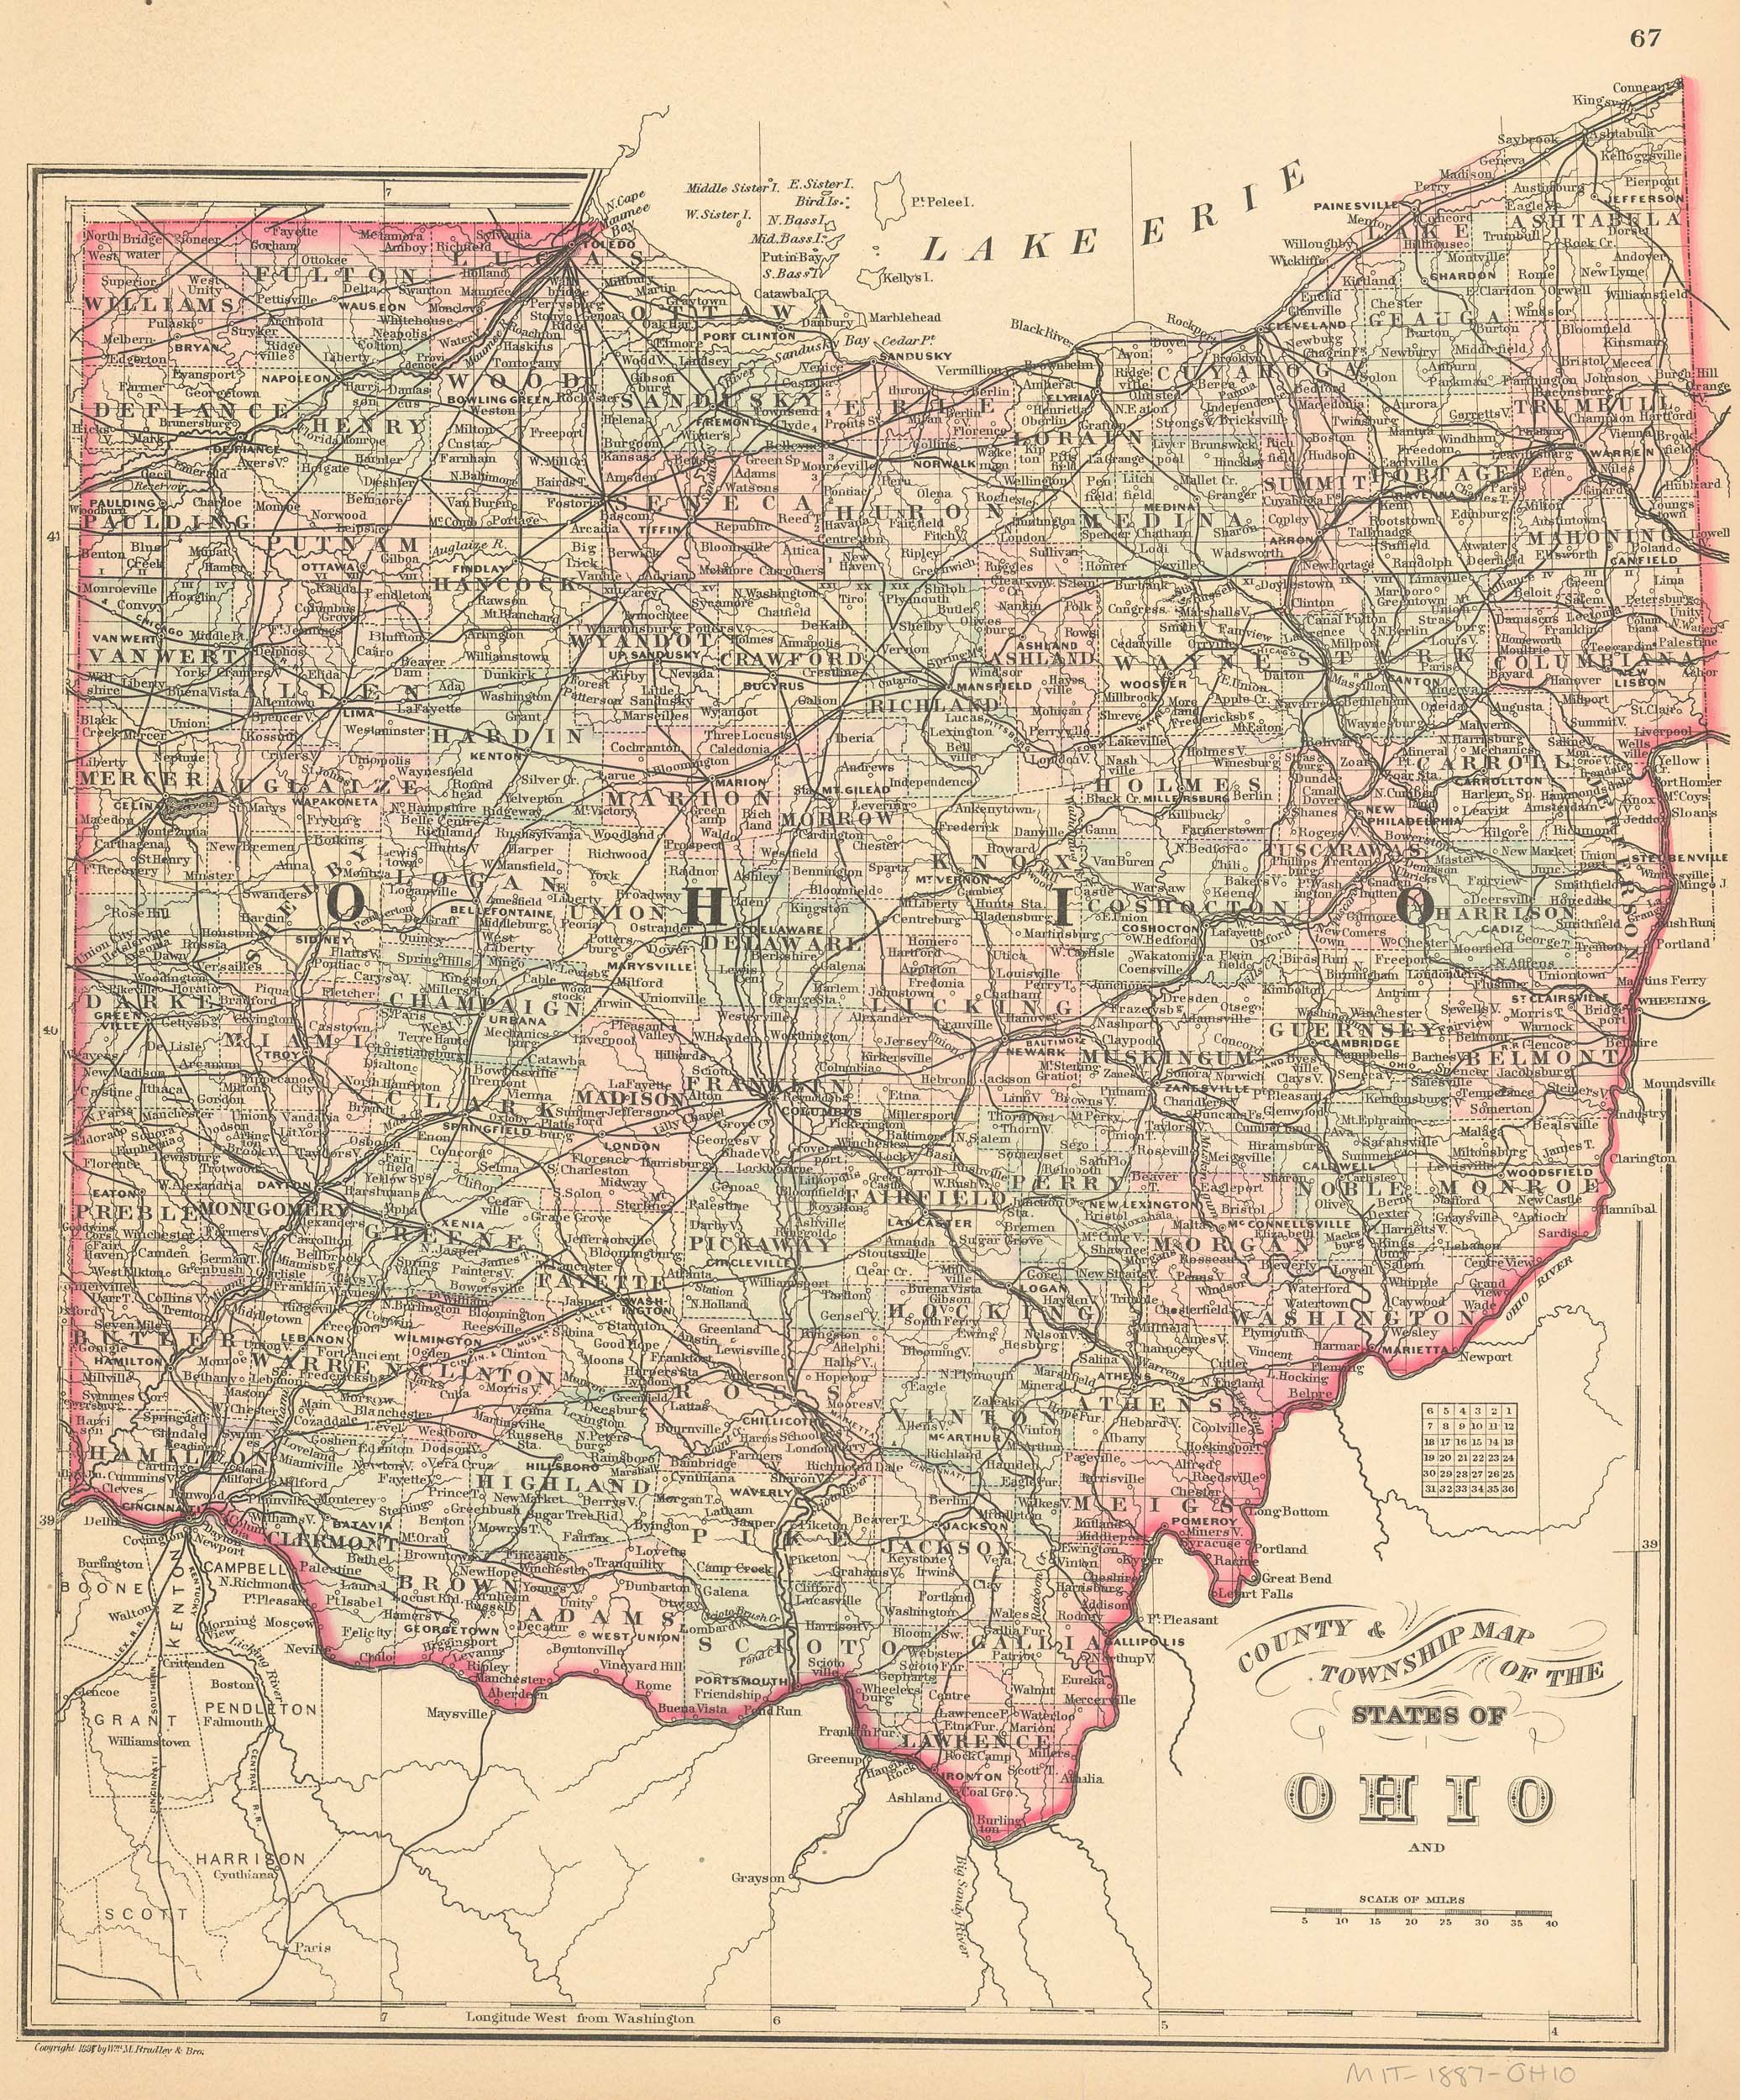 County & Township Map of the States of Ohio Barnebys